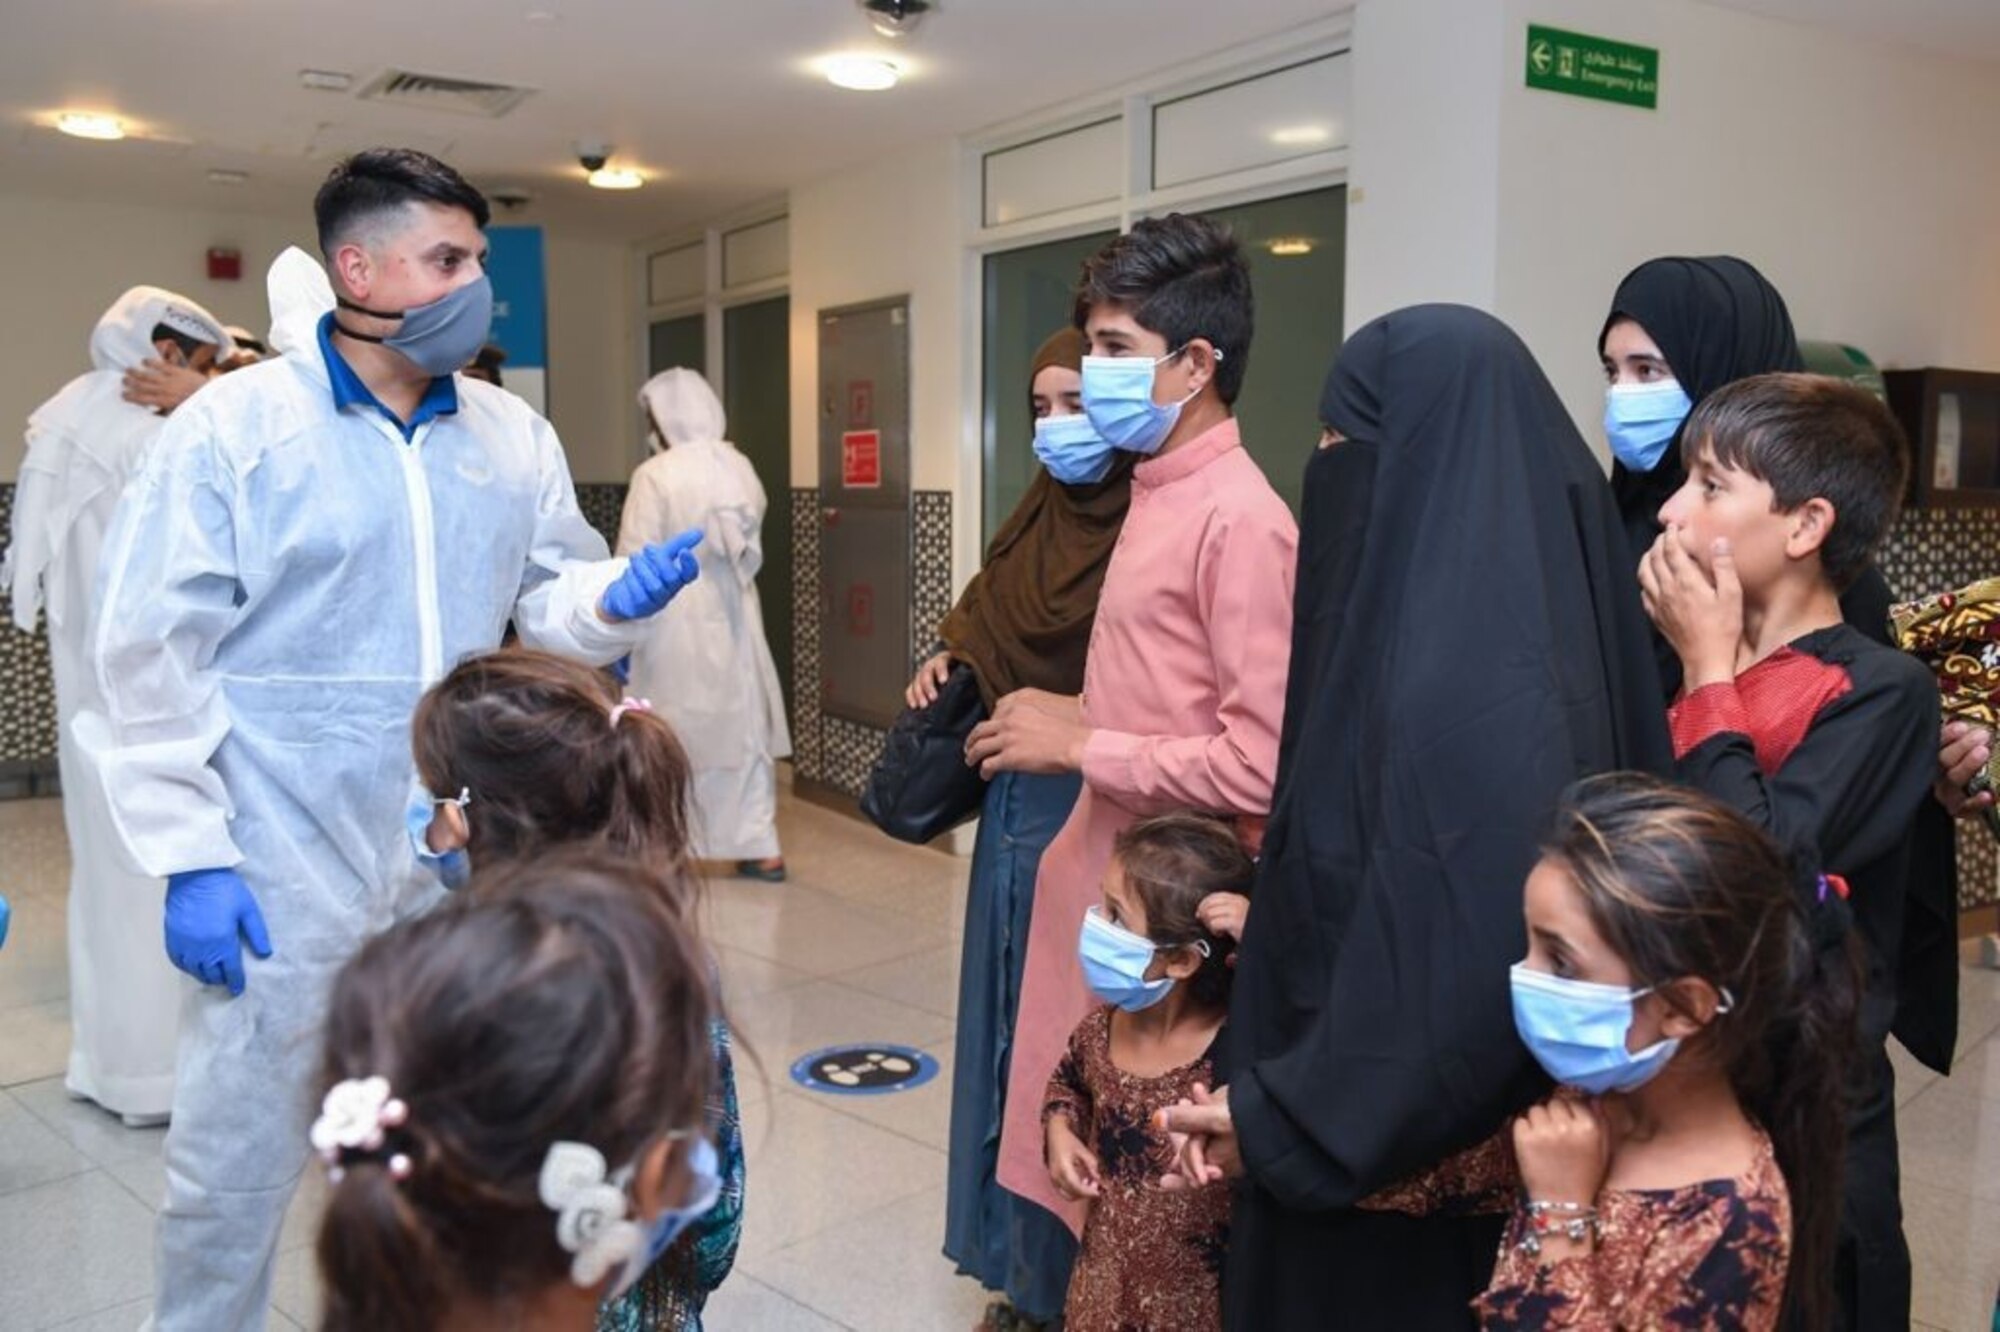 U.S. Air Force Lt. Col. Asim Khan, LEAP Scholar and director of staff, U.S. Air Forces Central Air Warfare Center, Al Dhafra Air Base, United Arab Emirates, helps transition Afghan evacuees from Abu Dhabi International Airport to the Emirati Humanitarian City during the evacuation of American citizens, special immigrant visa applicants and other at-risk individuals from Afghanistan in August 2021.